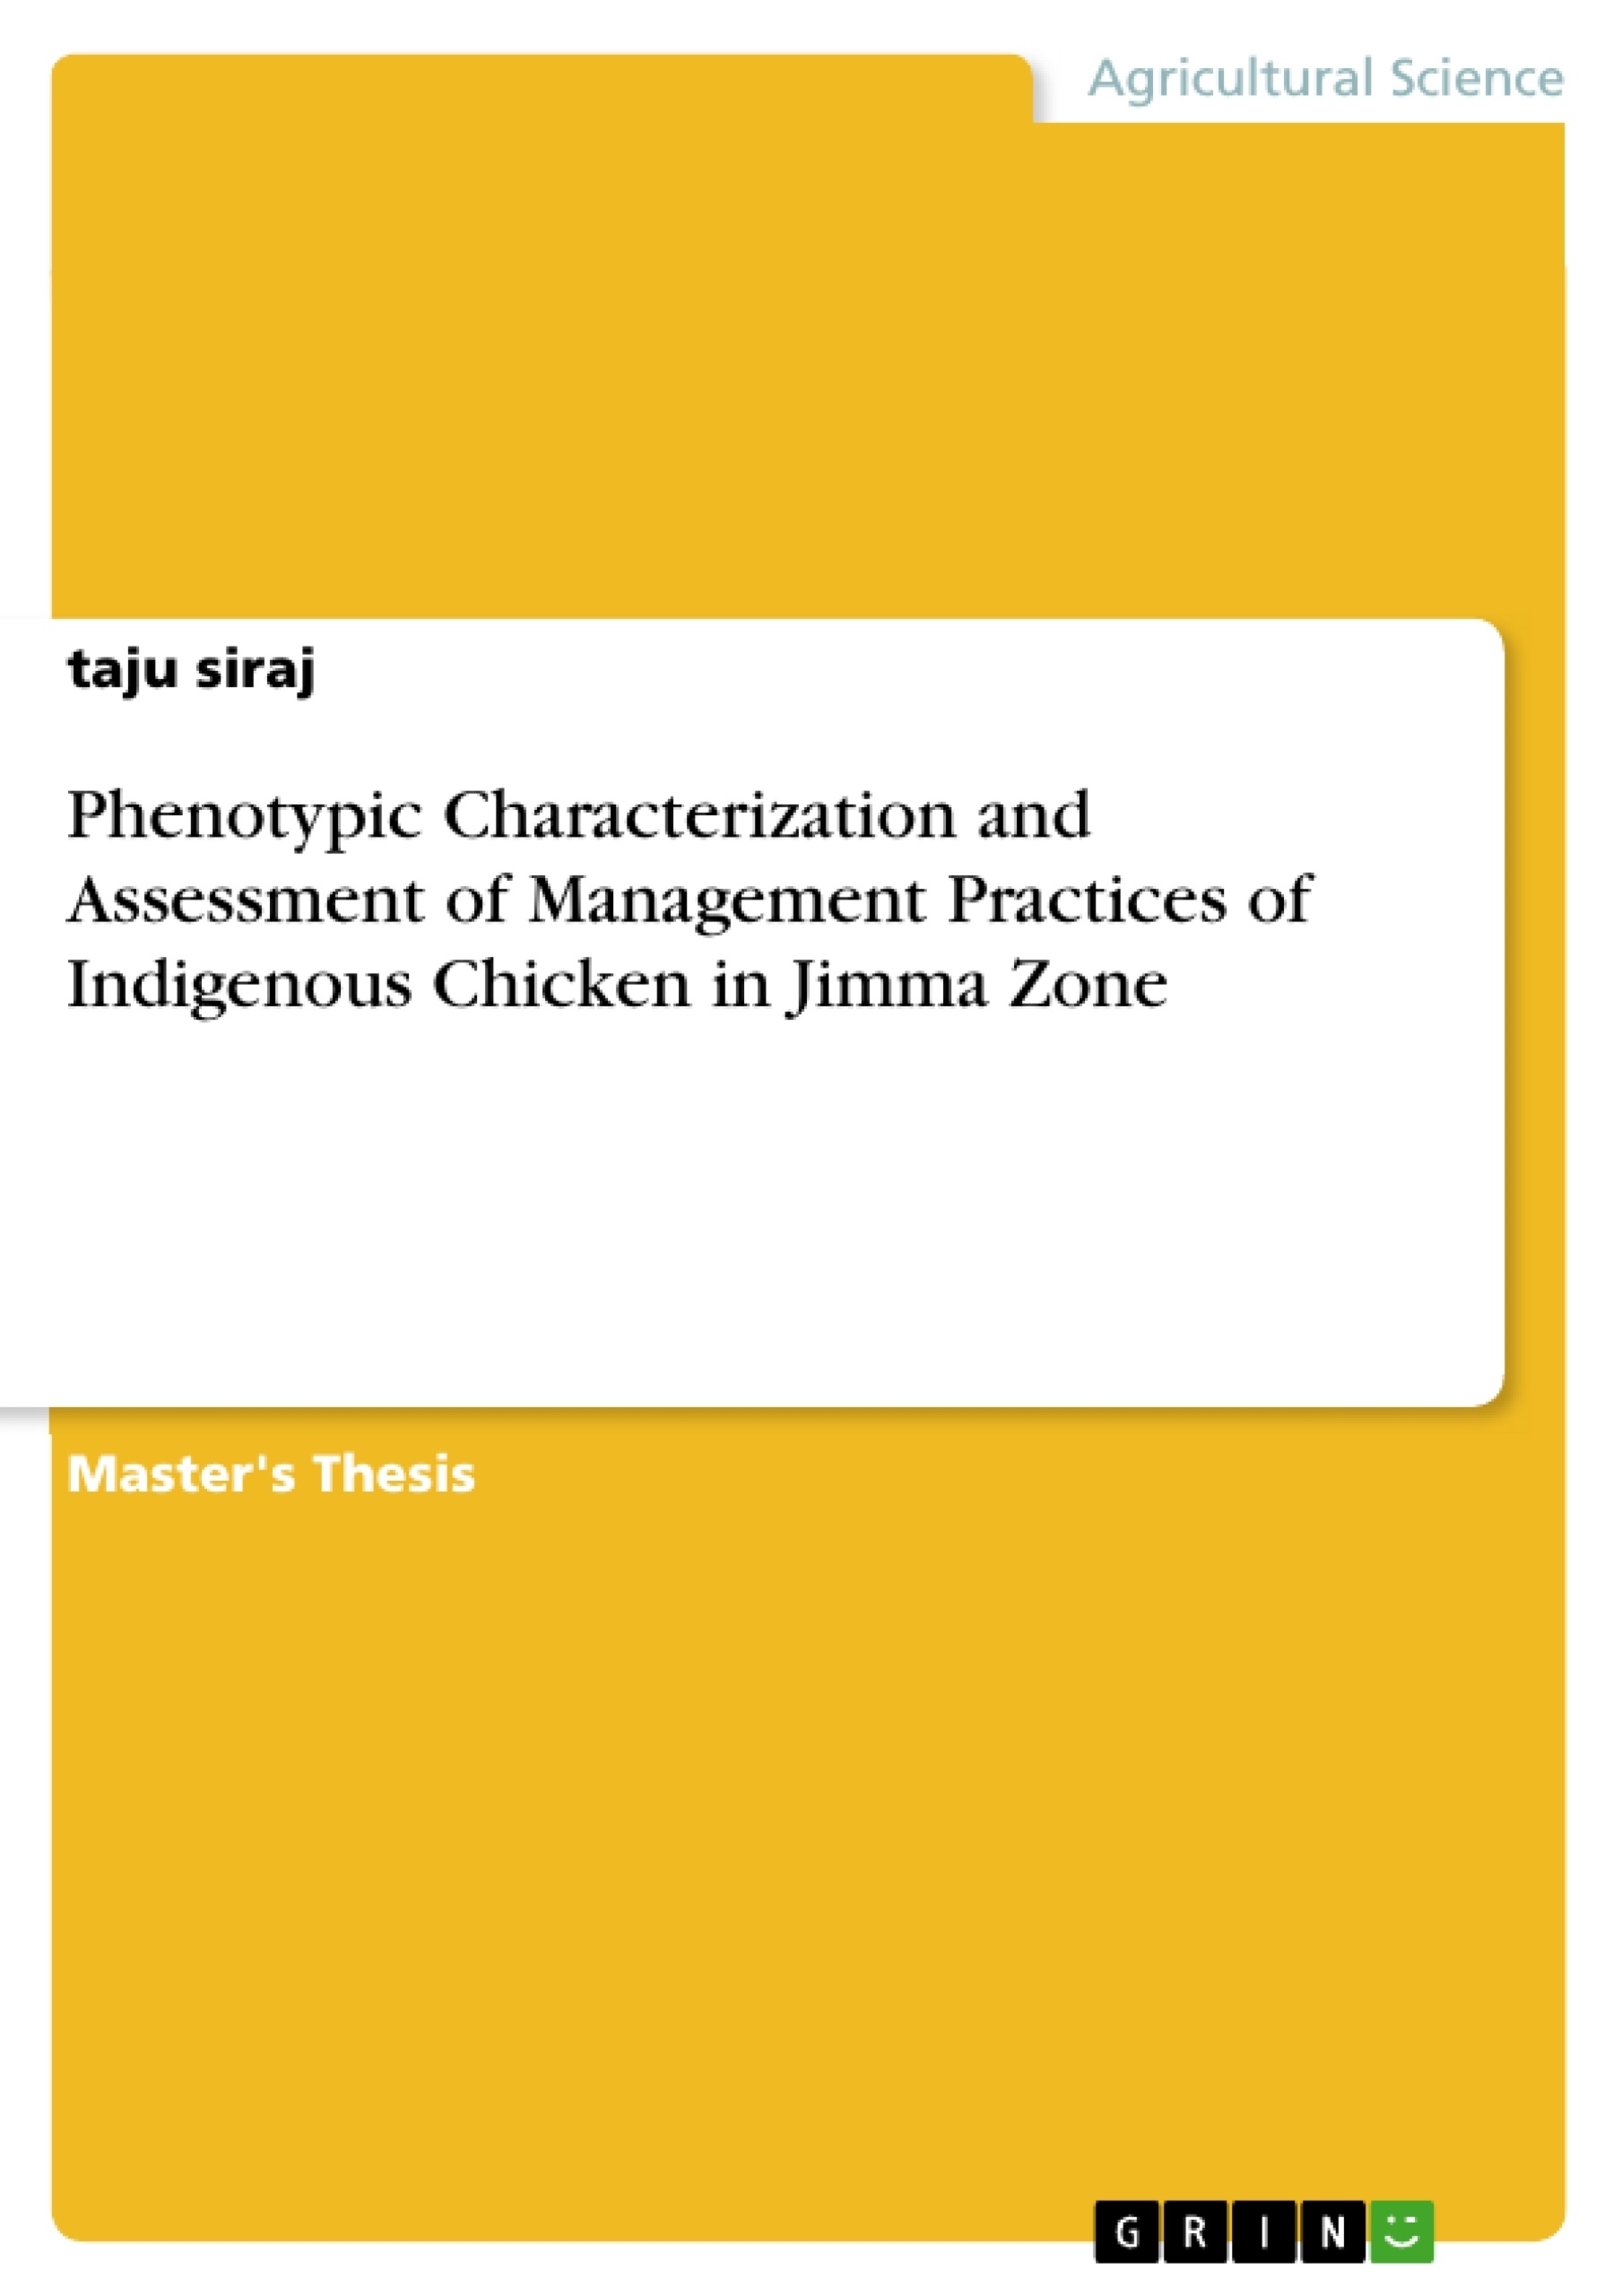 Title: Phenotypic Characterization and Assessment of Management Practices of Indigenous Chicken in Jimma Zone